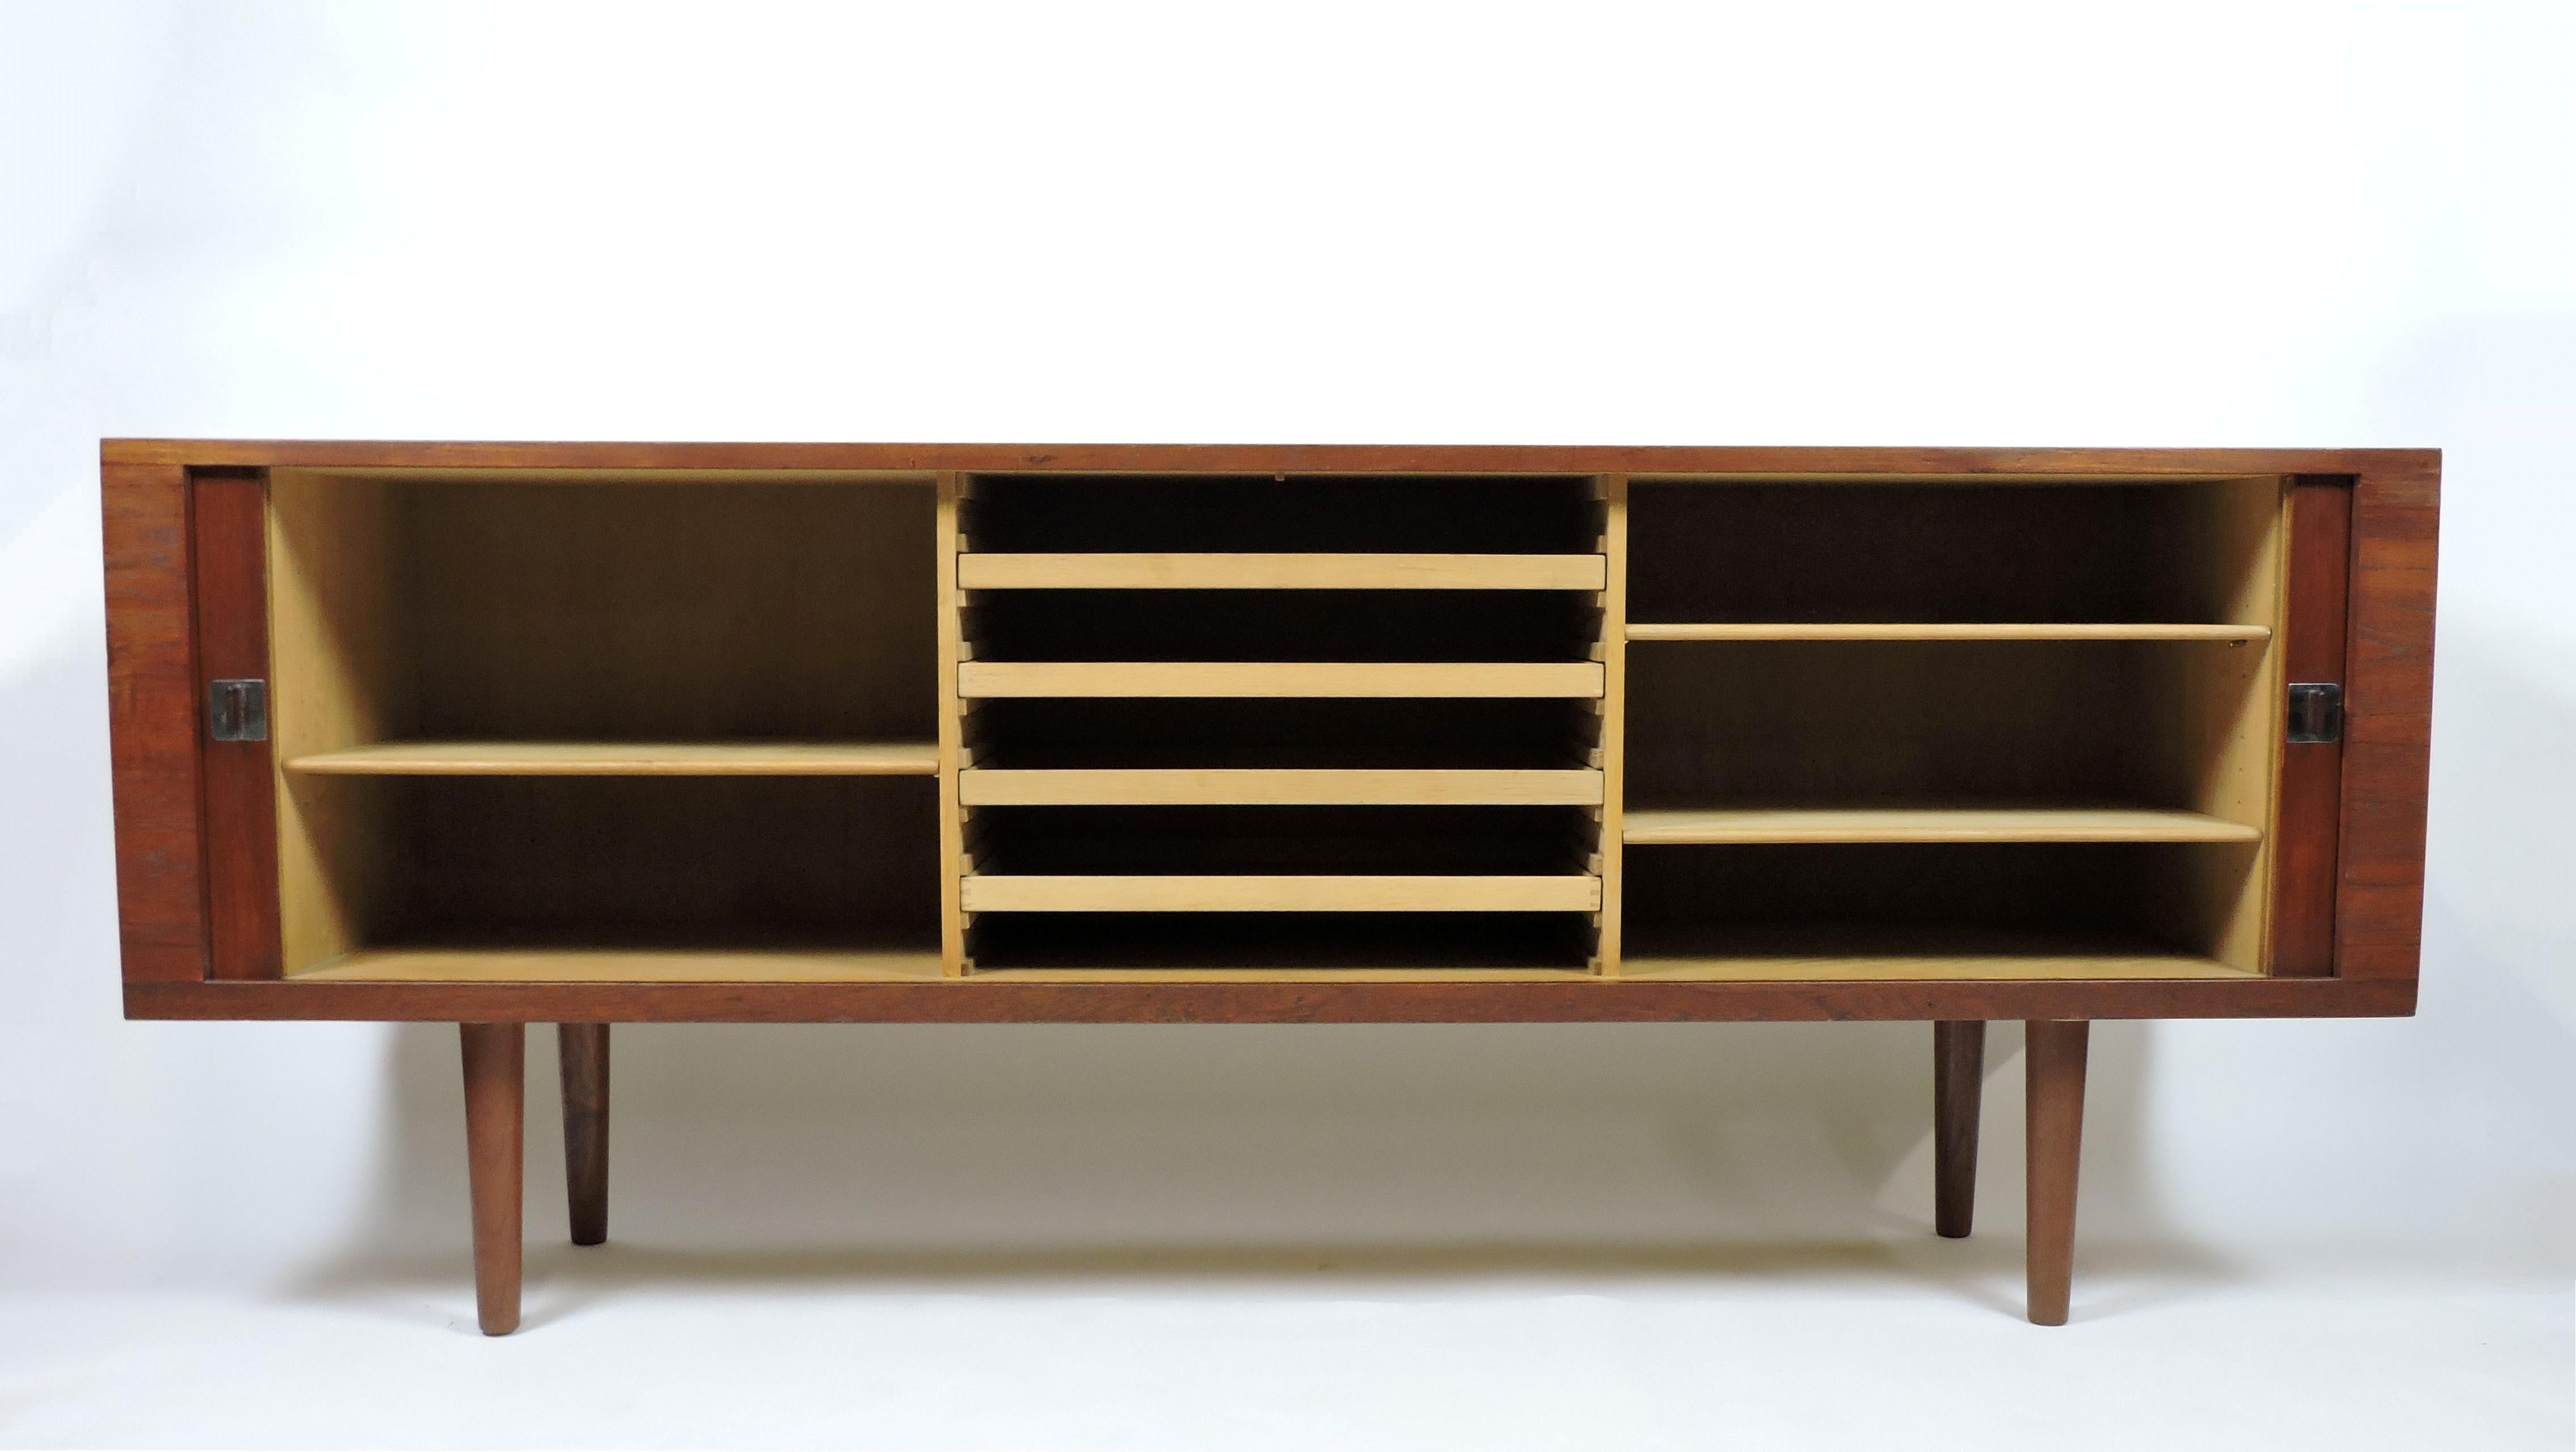 Elegant President credenza in teak designed by Hans Wegner and manufactured in Denmark by Ry Mobler. This handsome credenza has smooth sliding tambour doors with chrome and teak pulls, and rests on tapered teak legs. The oak interior has five